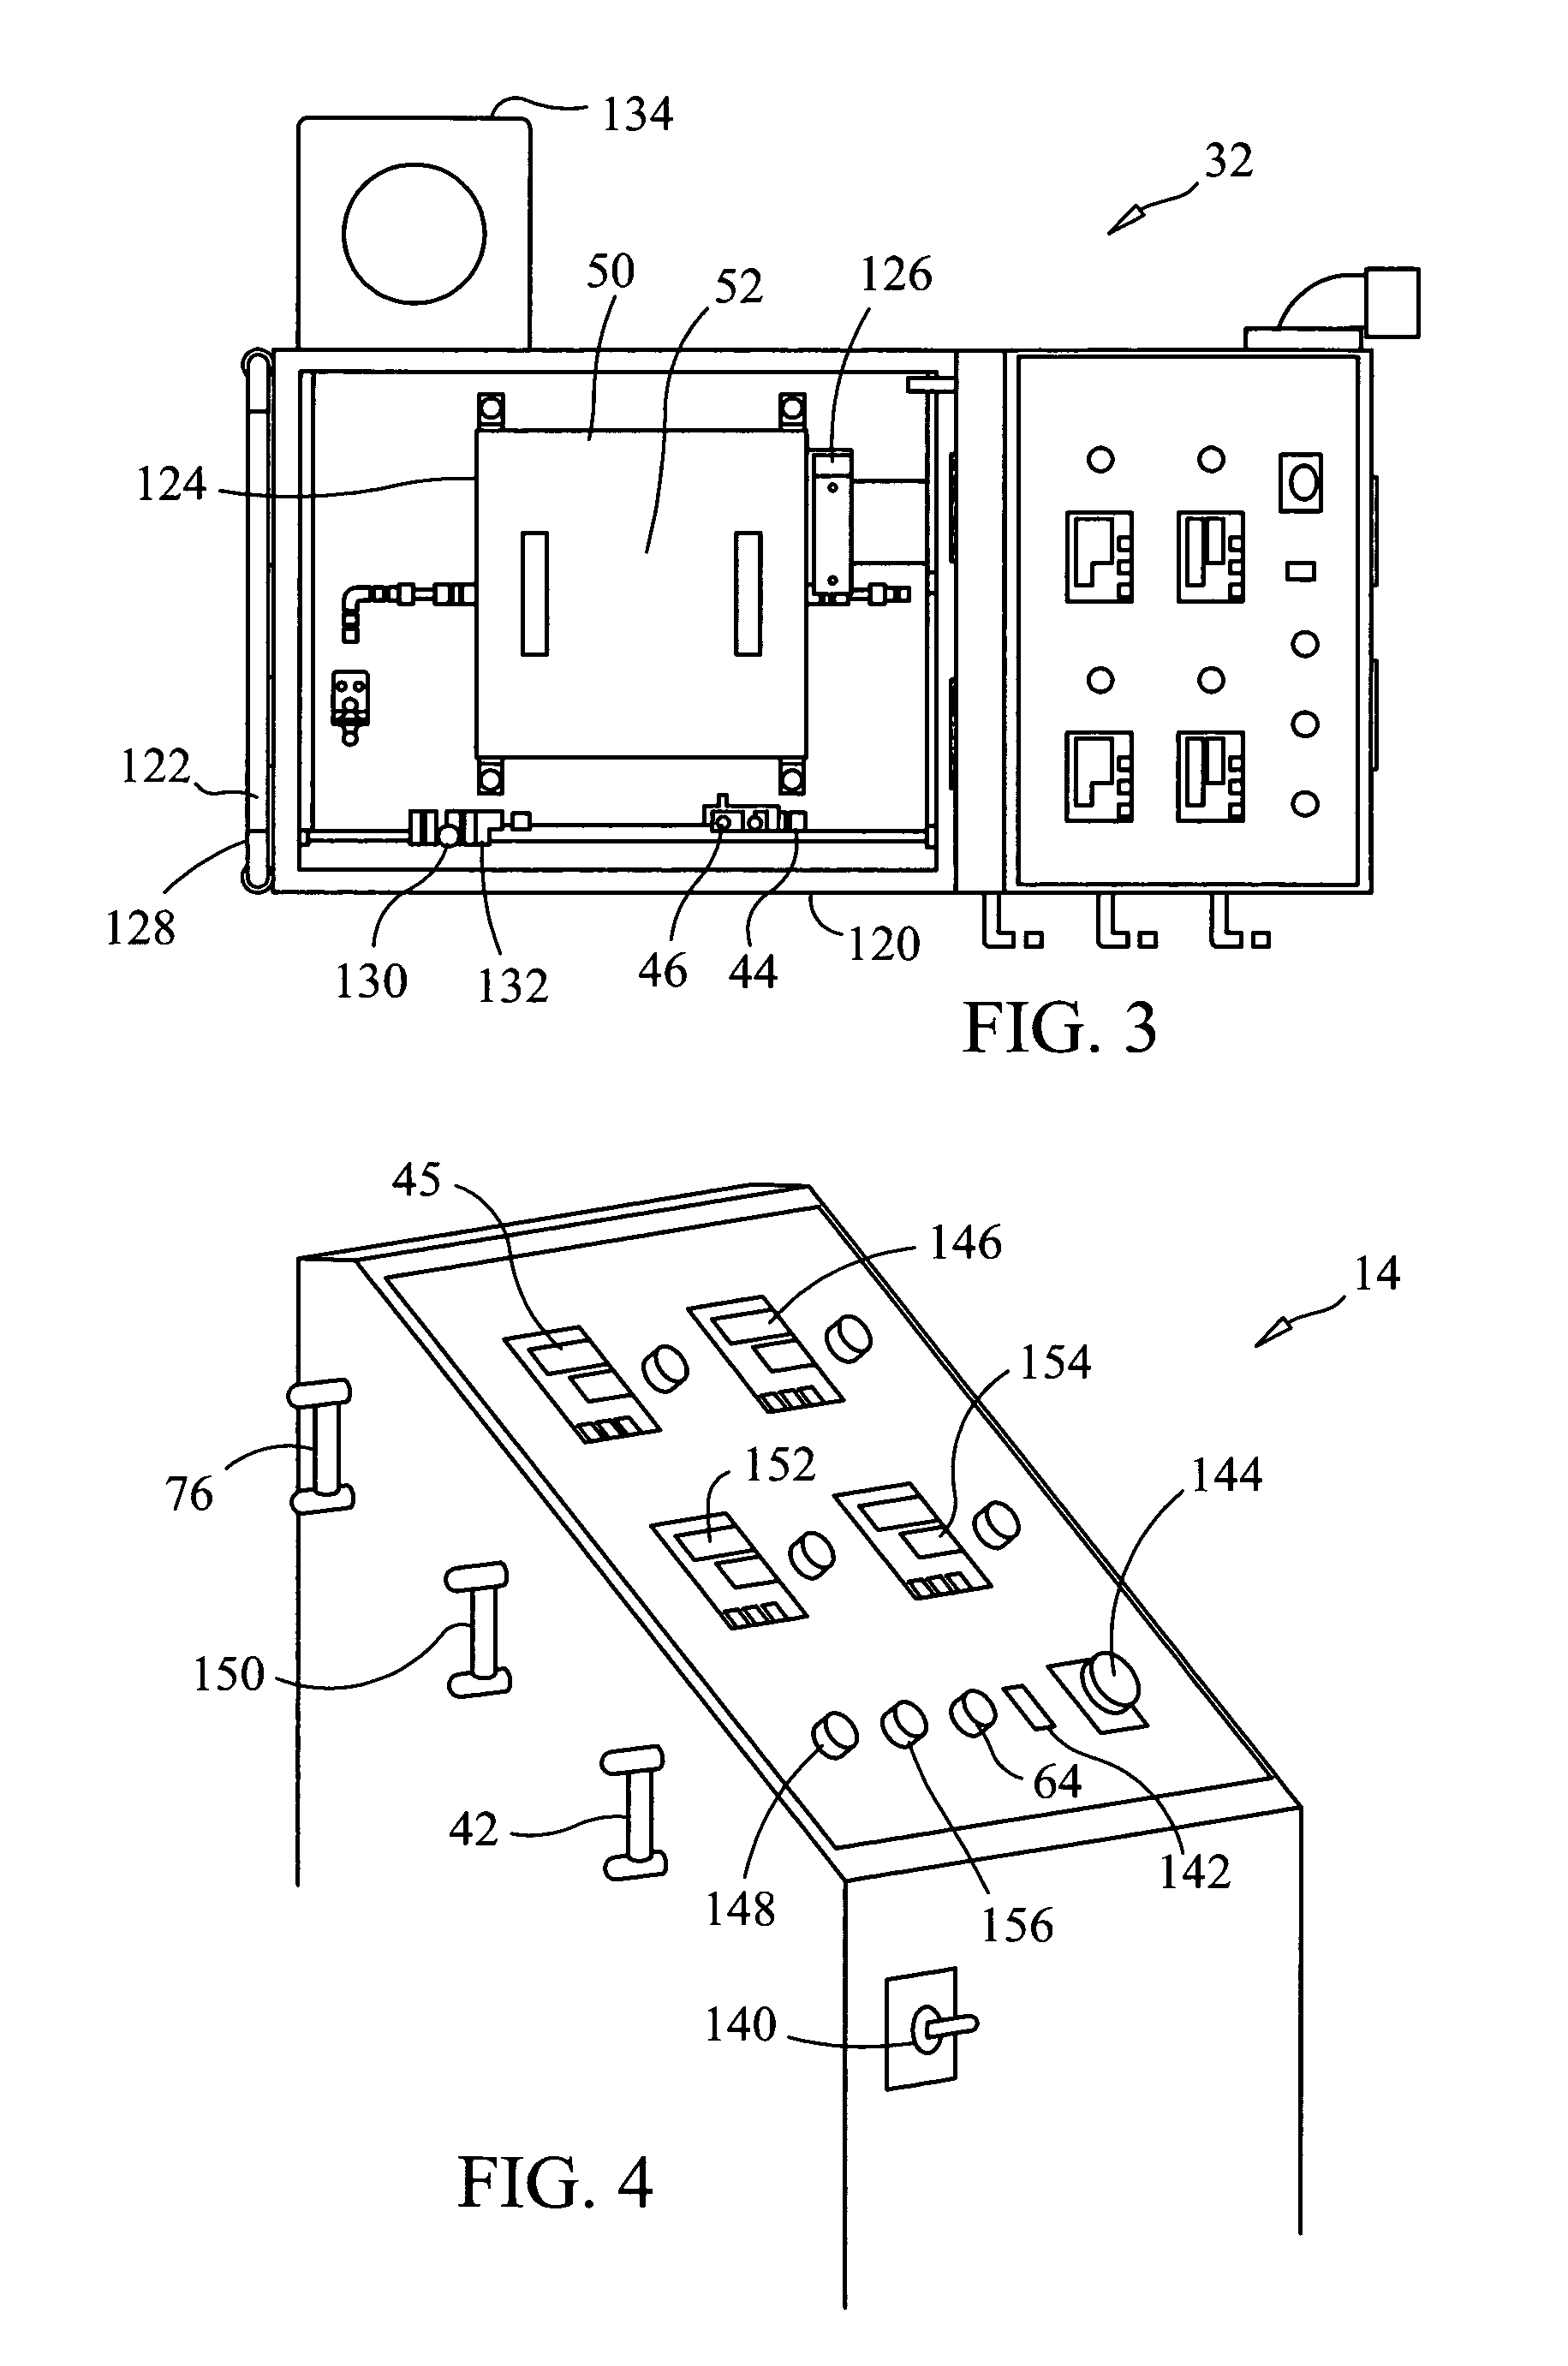 Thermal spray formation of polymer compositions